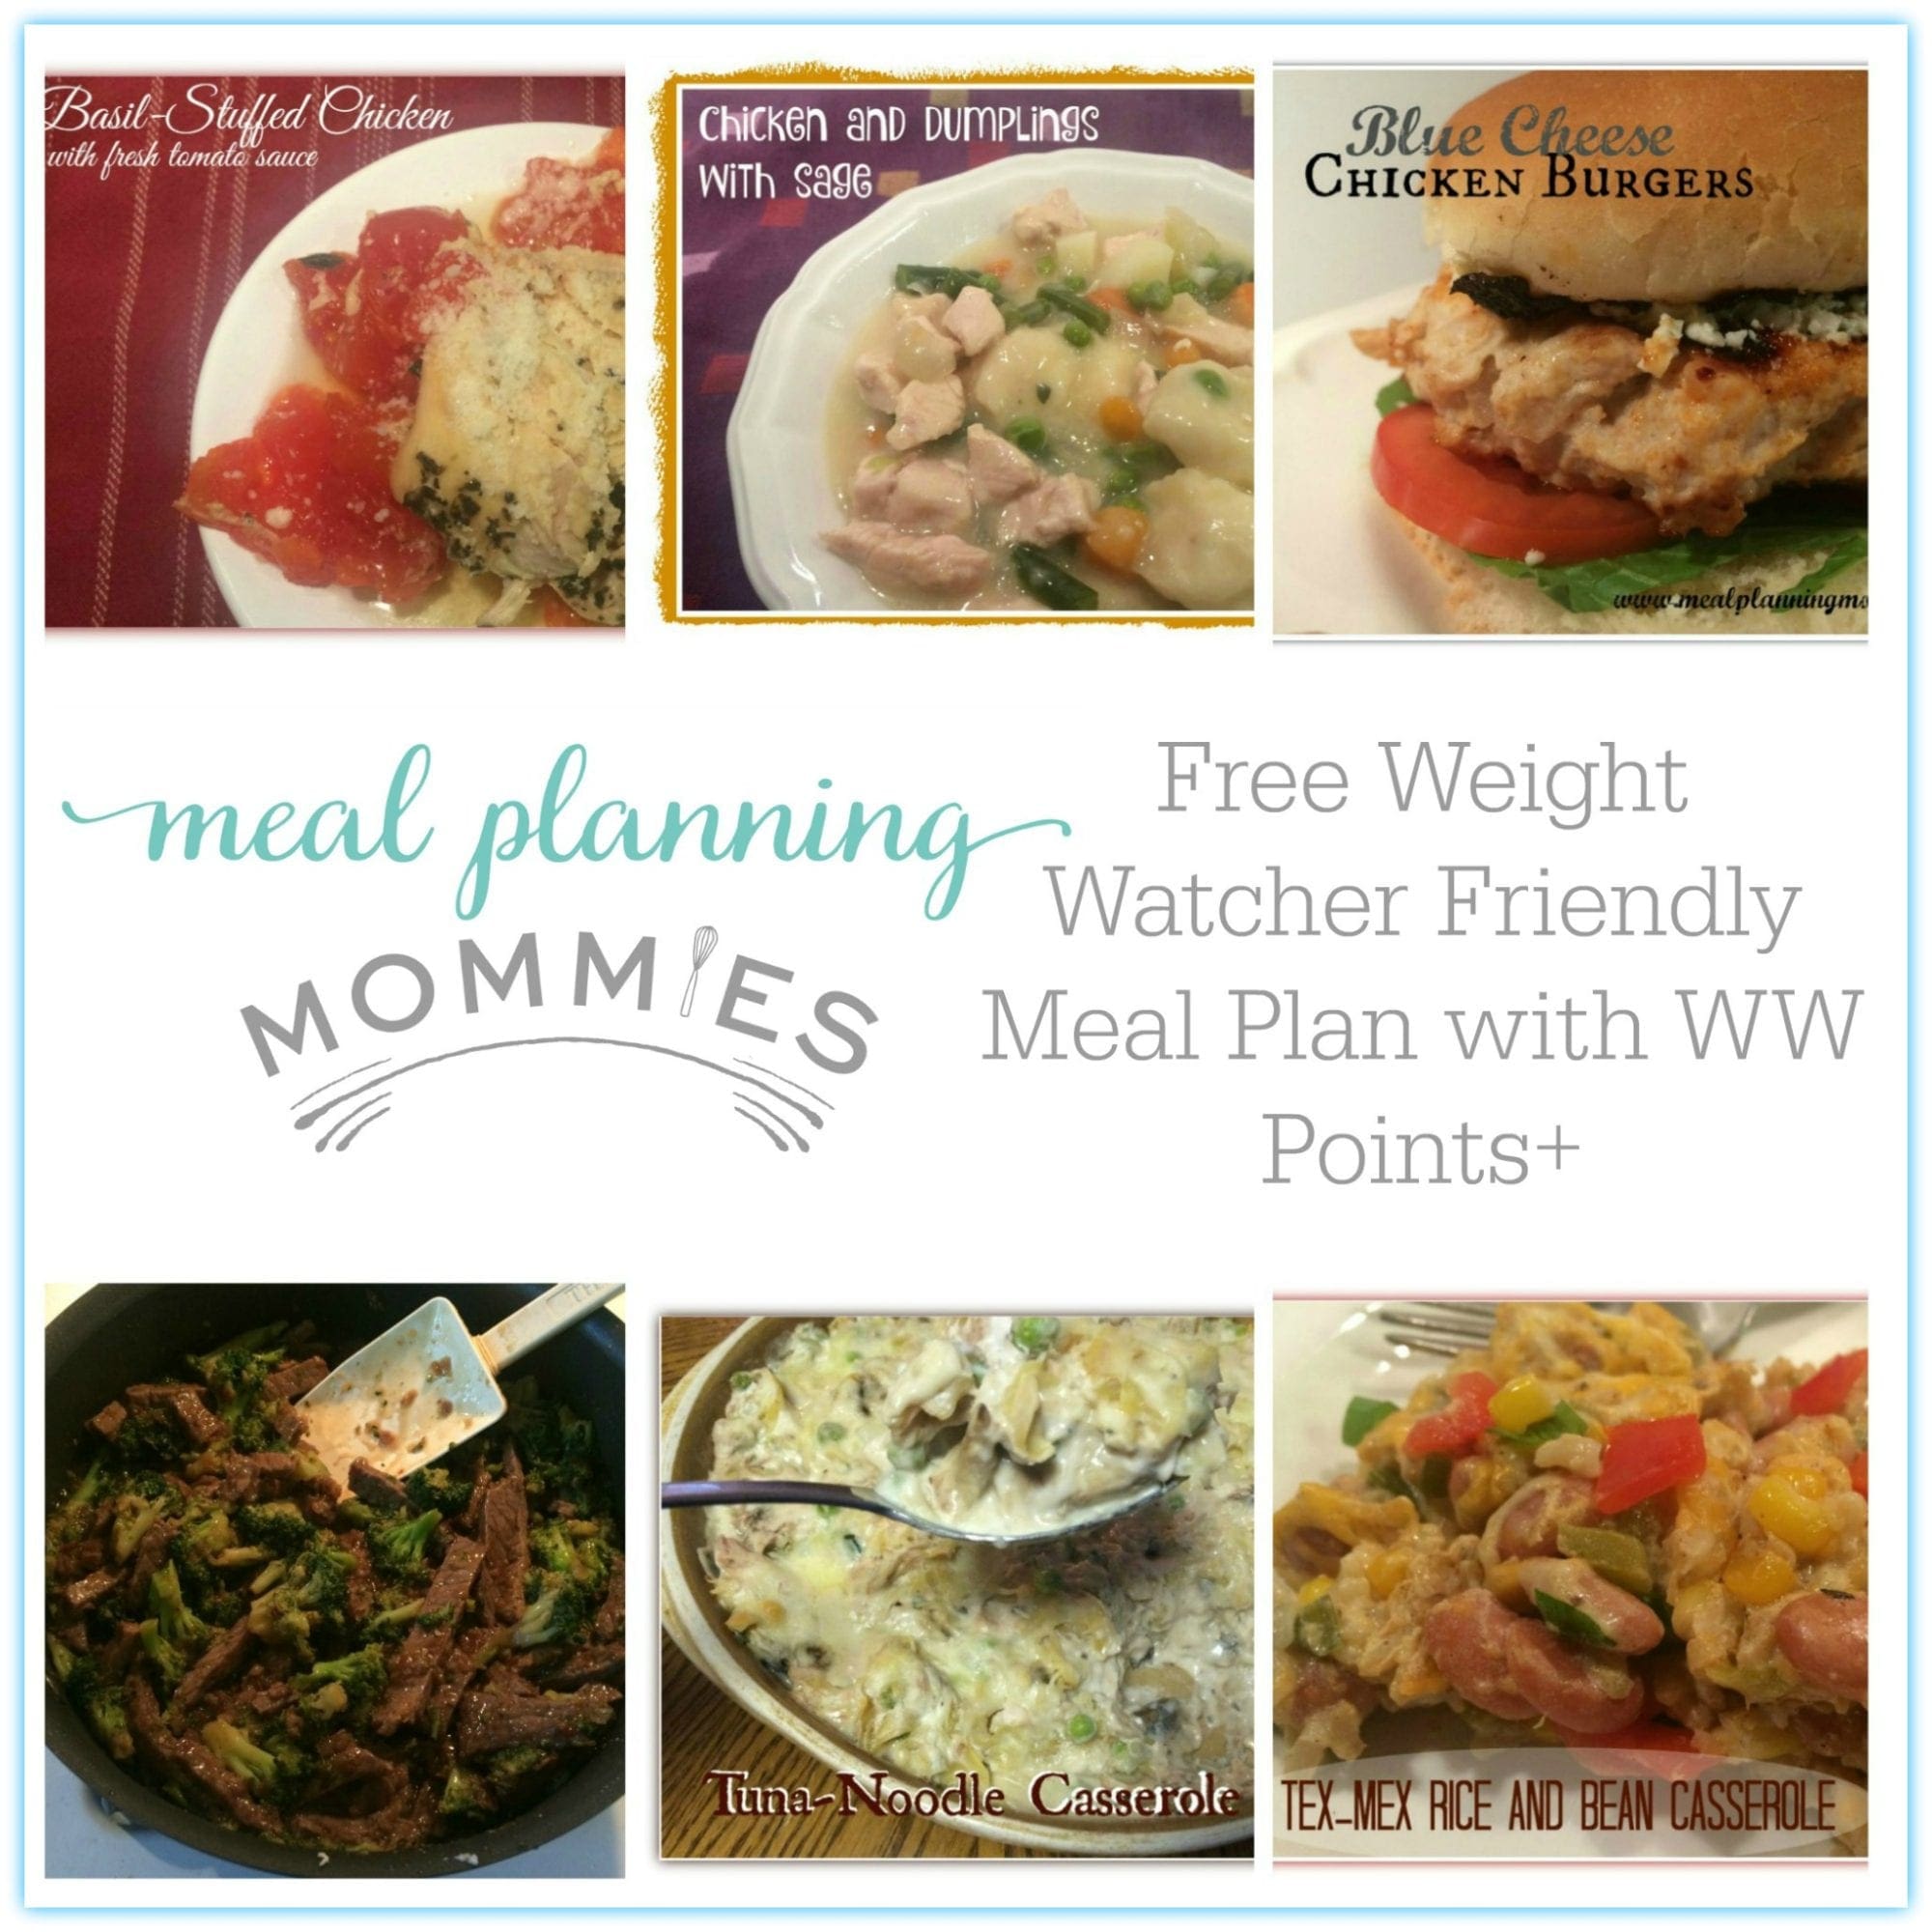 Oct. 11 WW Meal Plan main pic Meal Planning Mommies